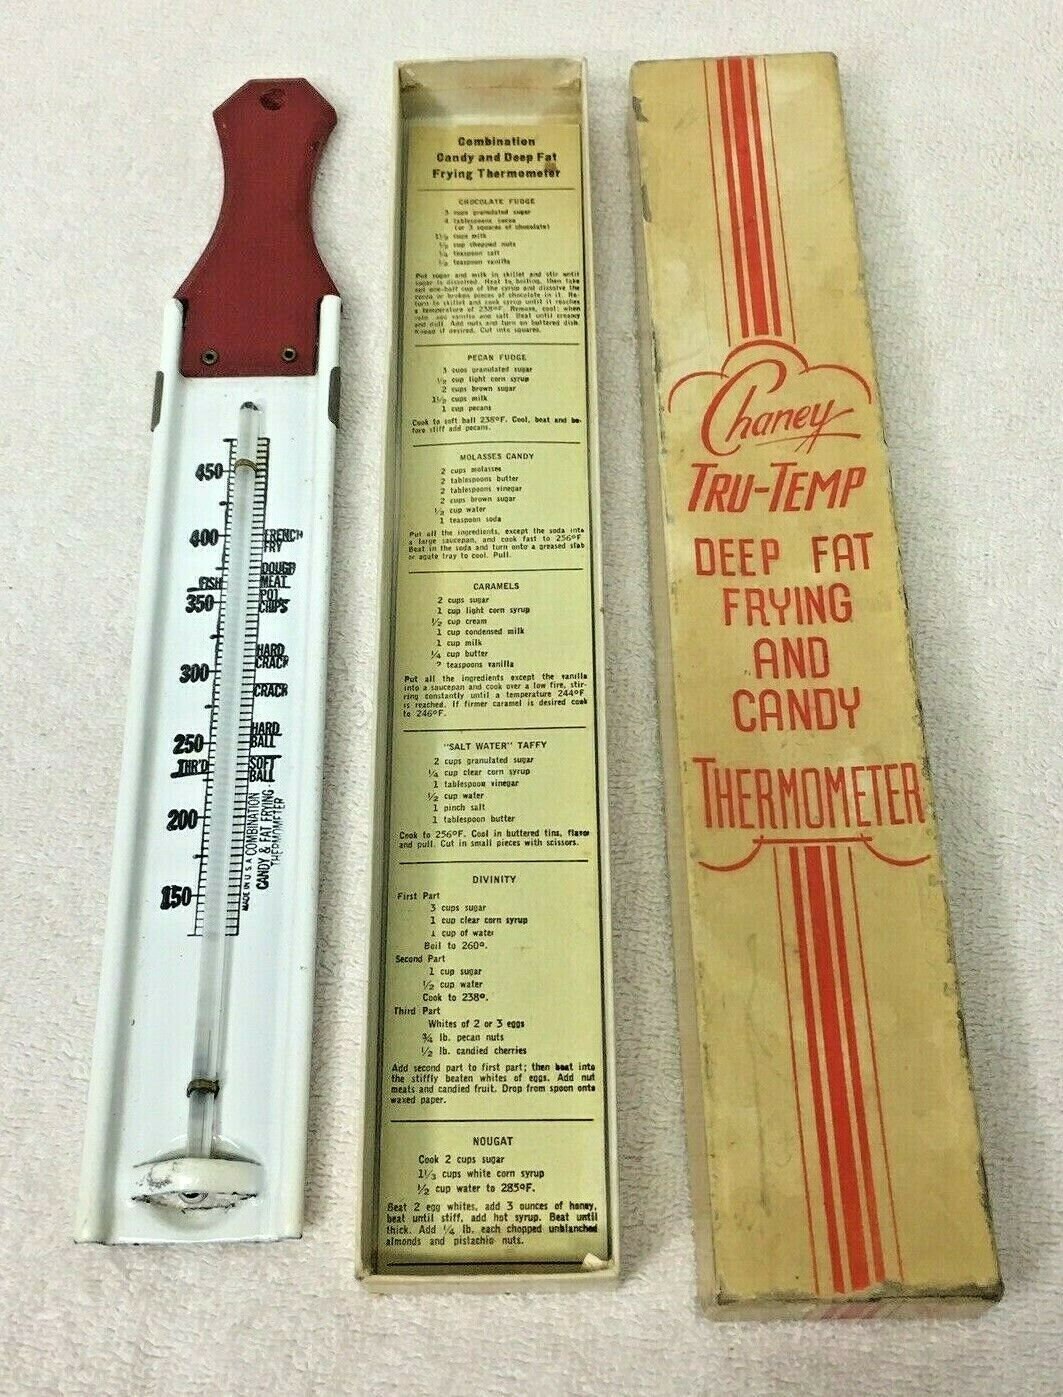 Wesson Oil deep frying thermometer advertising by Taylor collectible  vintage